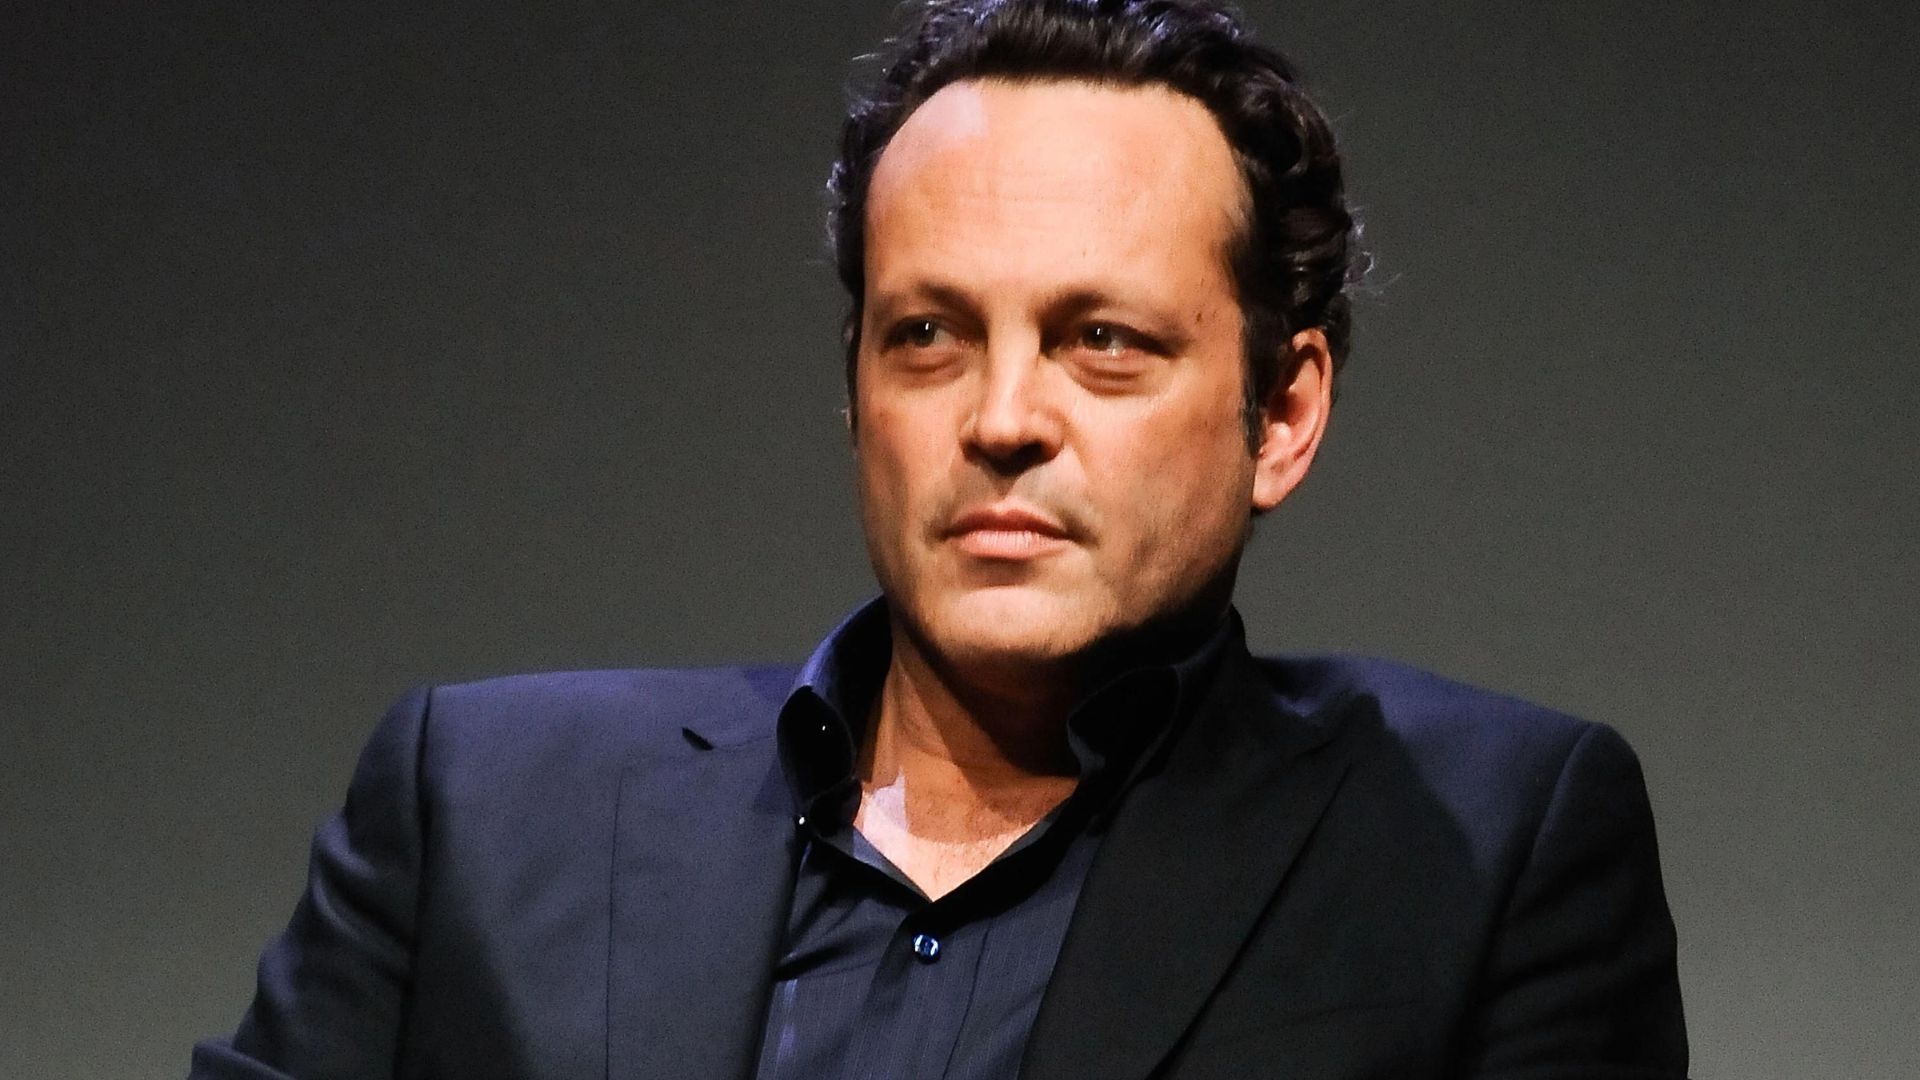 Vince Vaughn Sitting And Wearing Black Suit